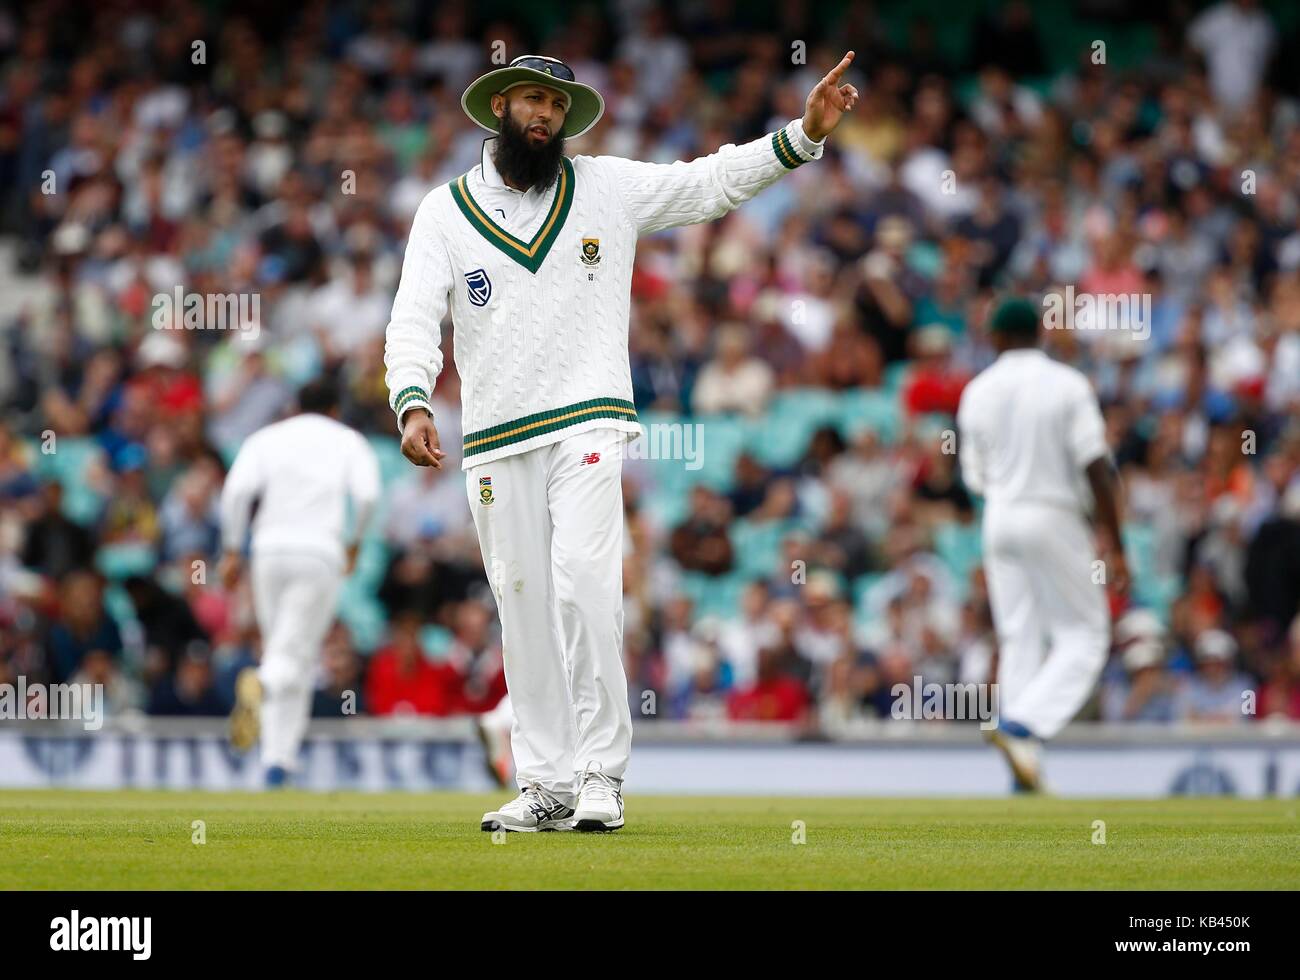 Hashim Amla of South Africa during day four of the third Investec Test match between England and South Africa at The Oval in London. 30 Jul 2017 Stock Photo